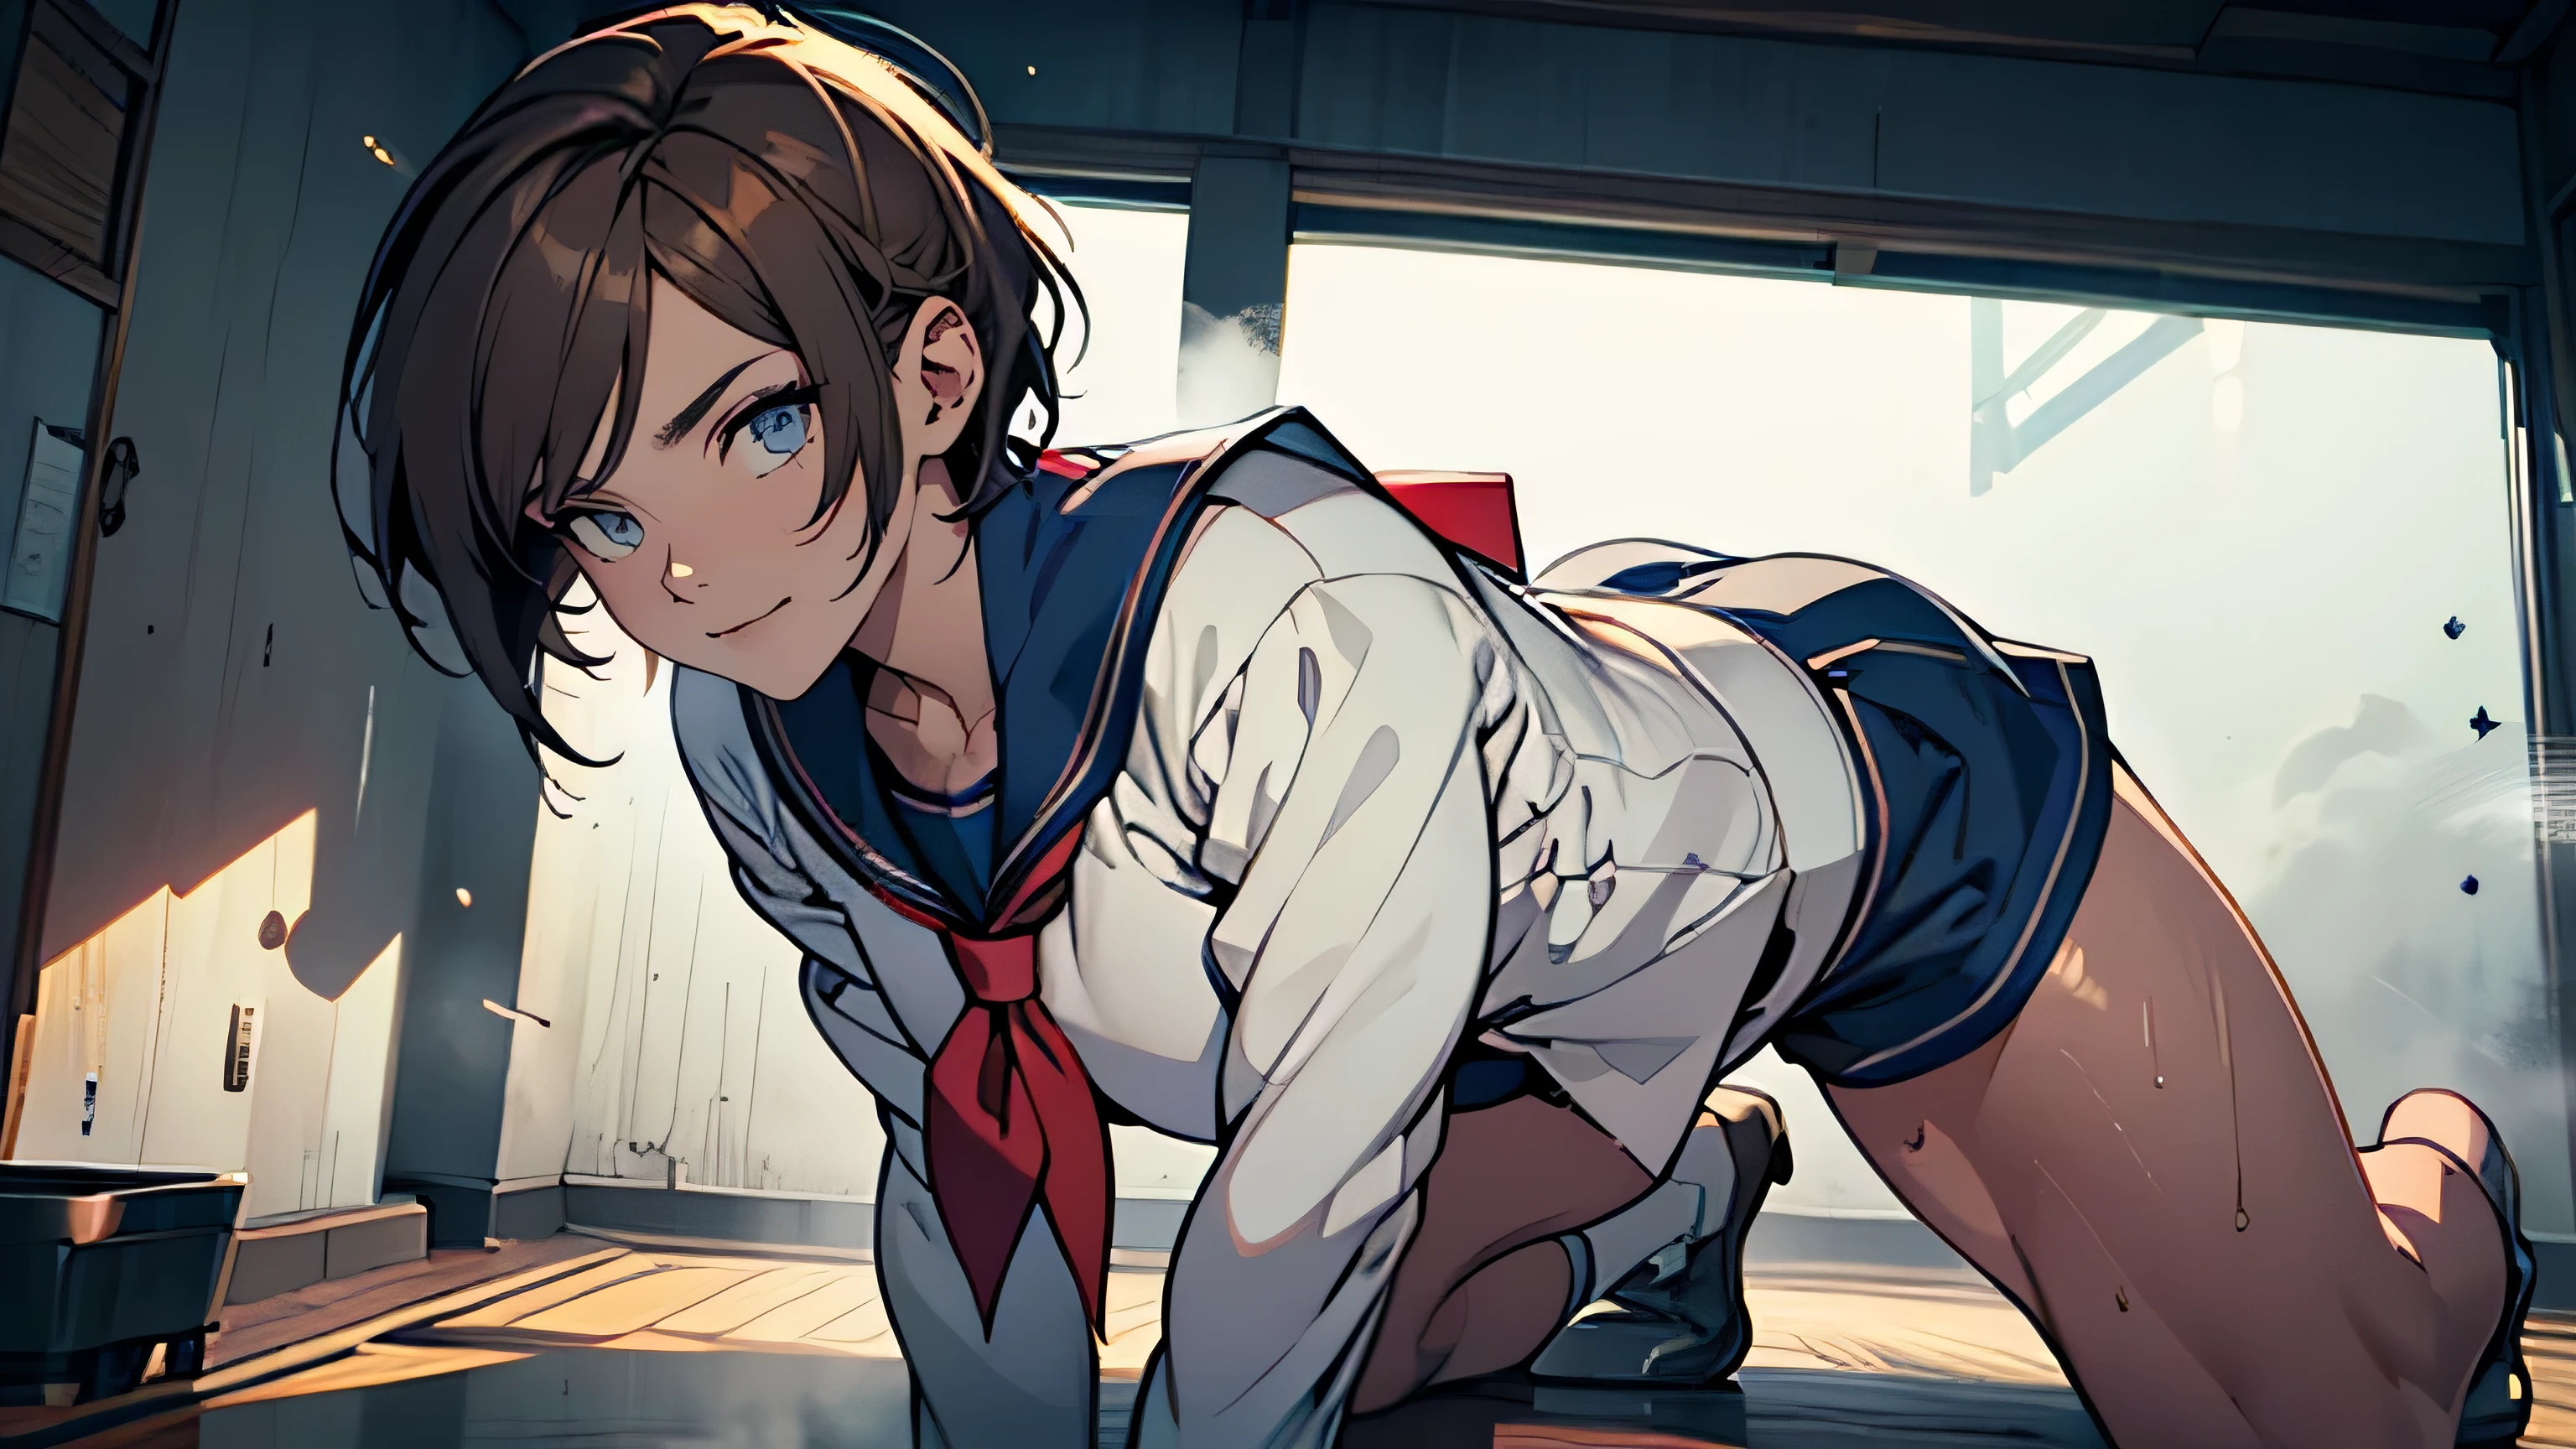 (High definition CG Unity 8k wallpaper). (masterpiece). (Highest quality). (Ultra definition). (Best illustration). (Best Shadow). (Absurd). 15 year old femboy. It's embarrassing. Sweat. steam. stare. Bob cut hairstyle. brown hair. Sailor suit. Navy shorts. Upturned eyes. , glowing fluorescent lights. Full body portrait. femboy. smile. 